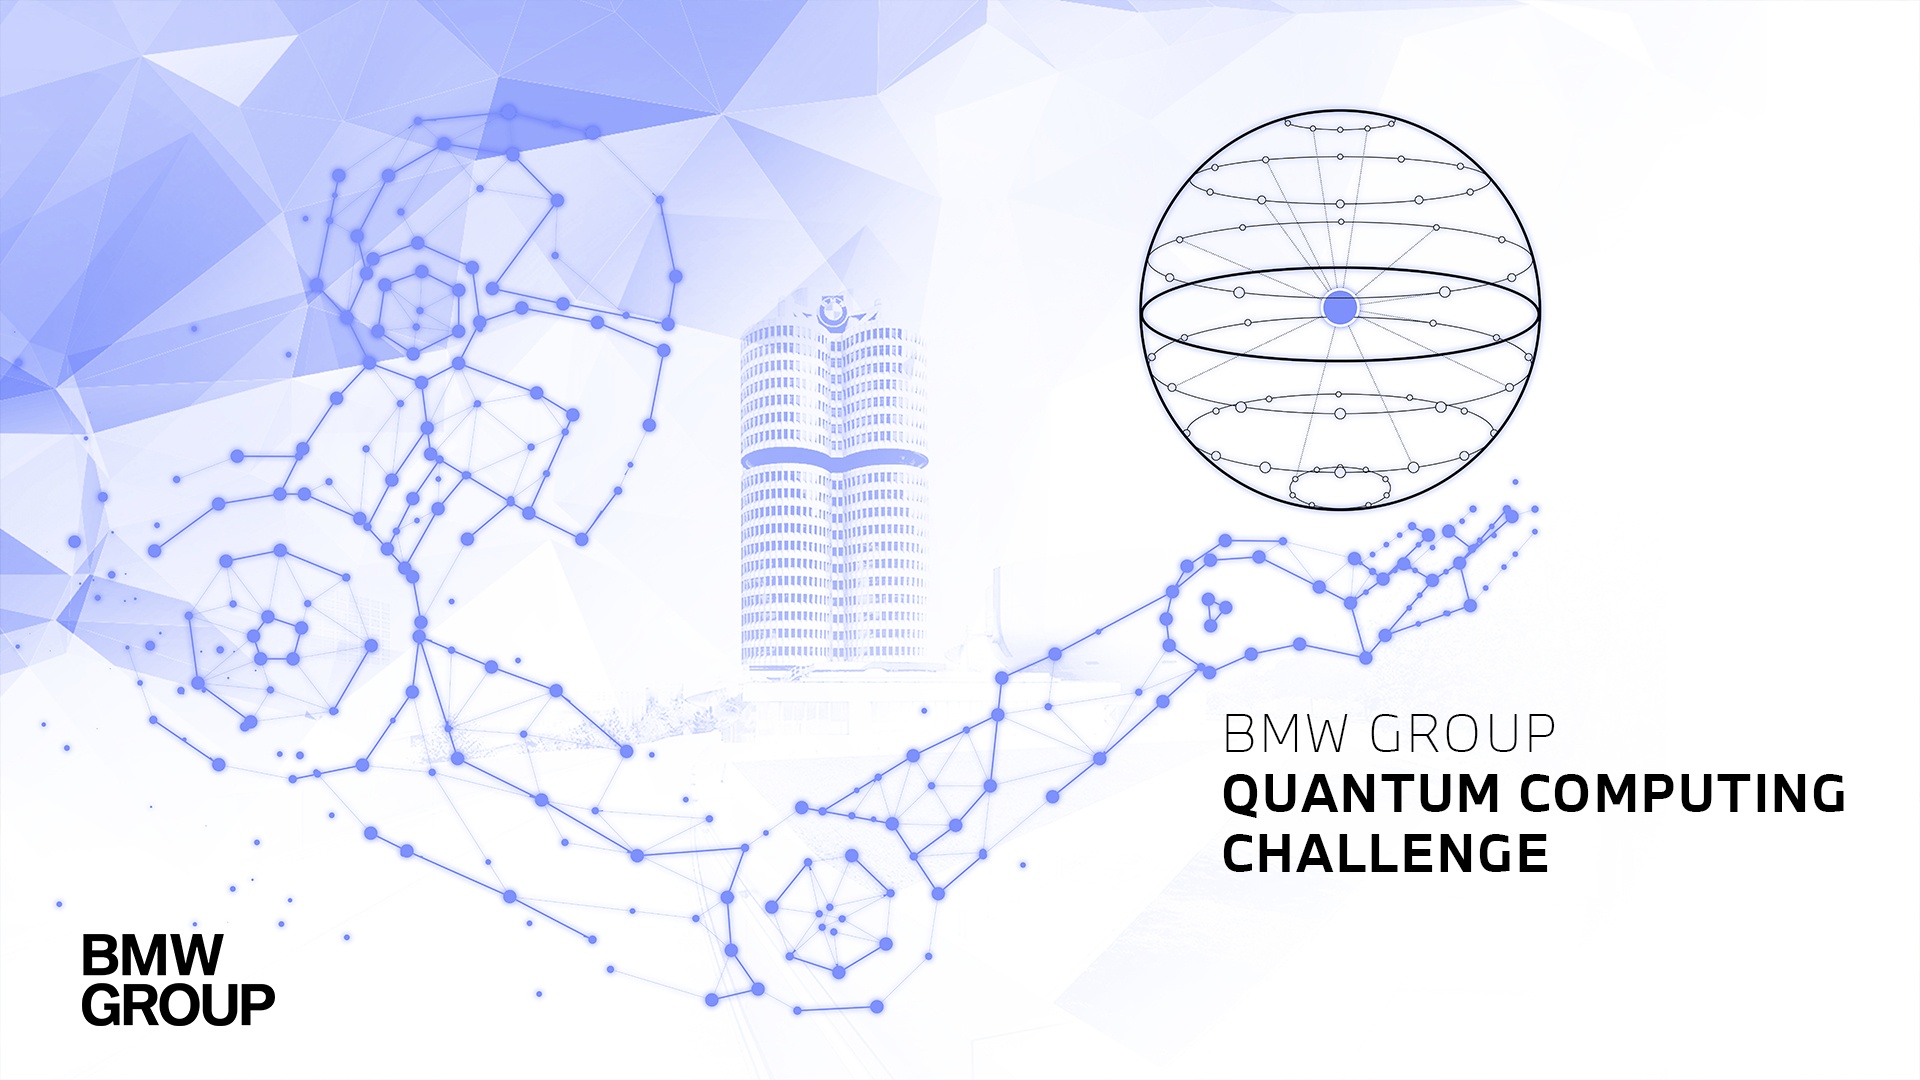 BMW Group launches “Quantum Computing Challenge” in collaboration with AWS to crowd-source innovation.